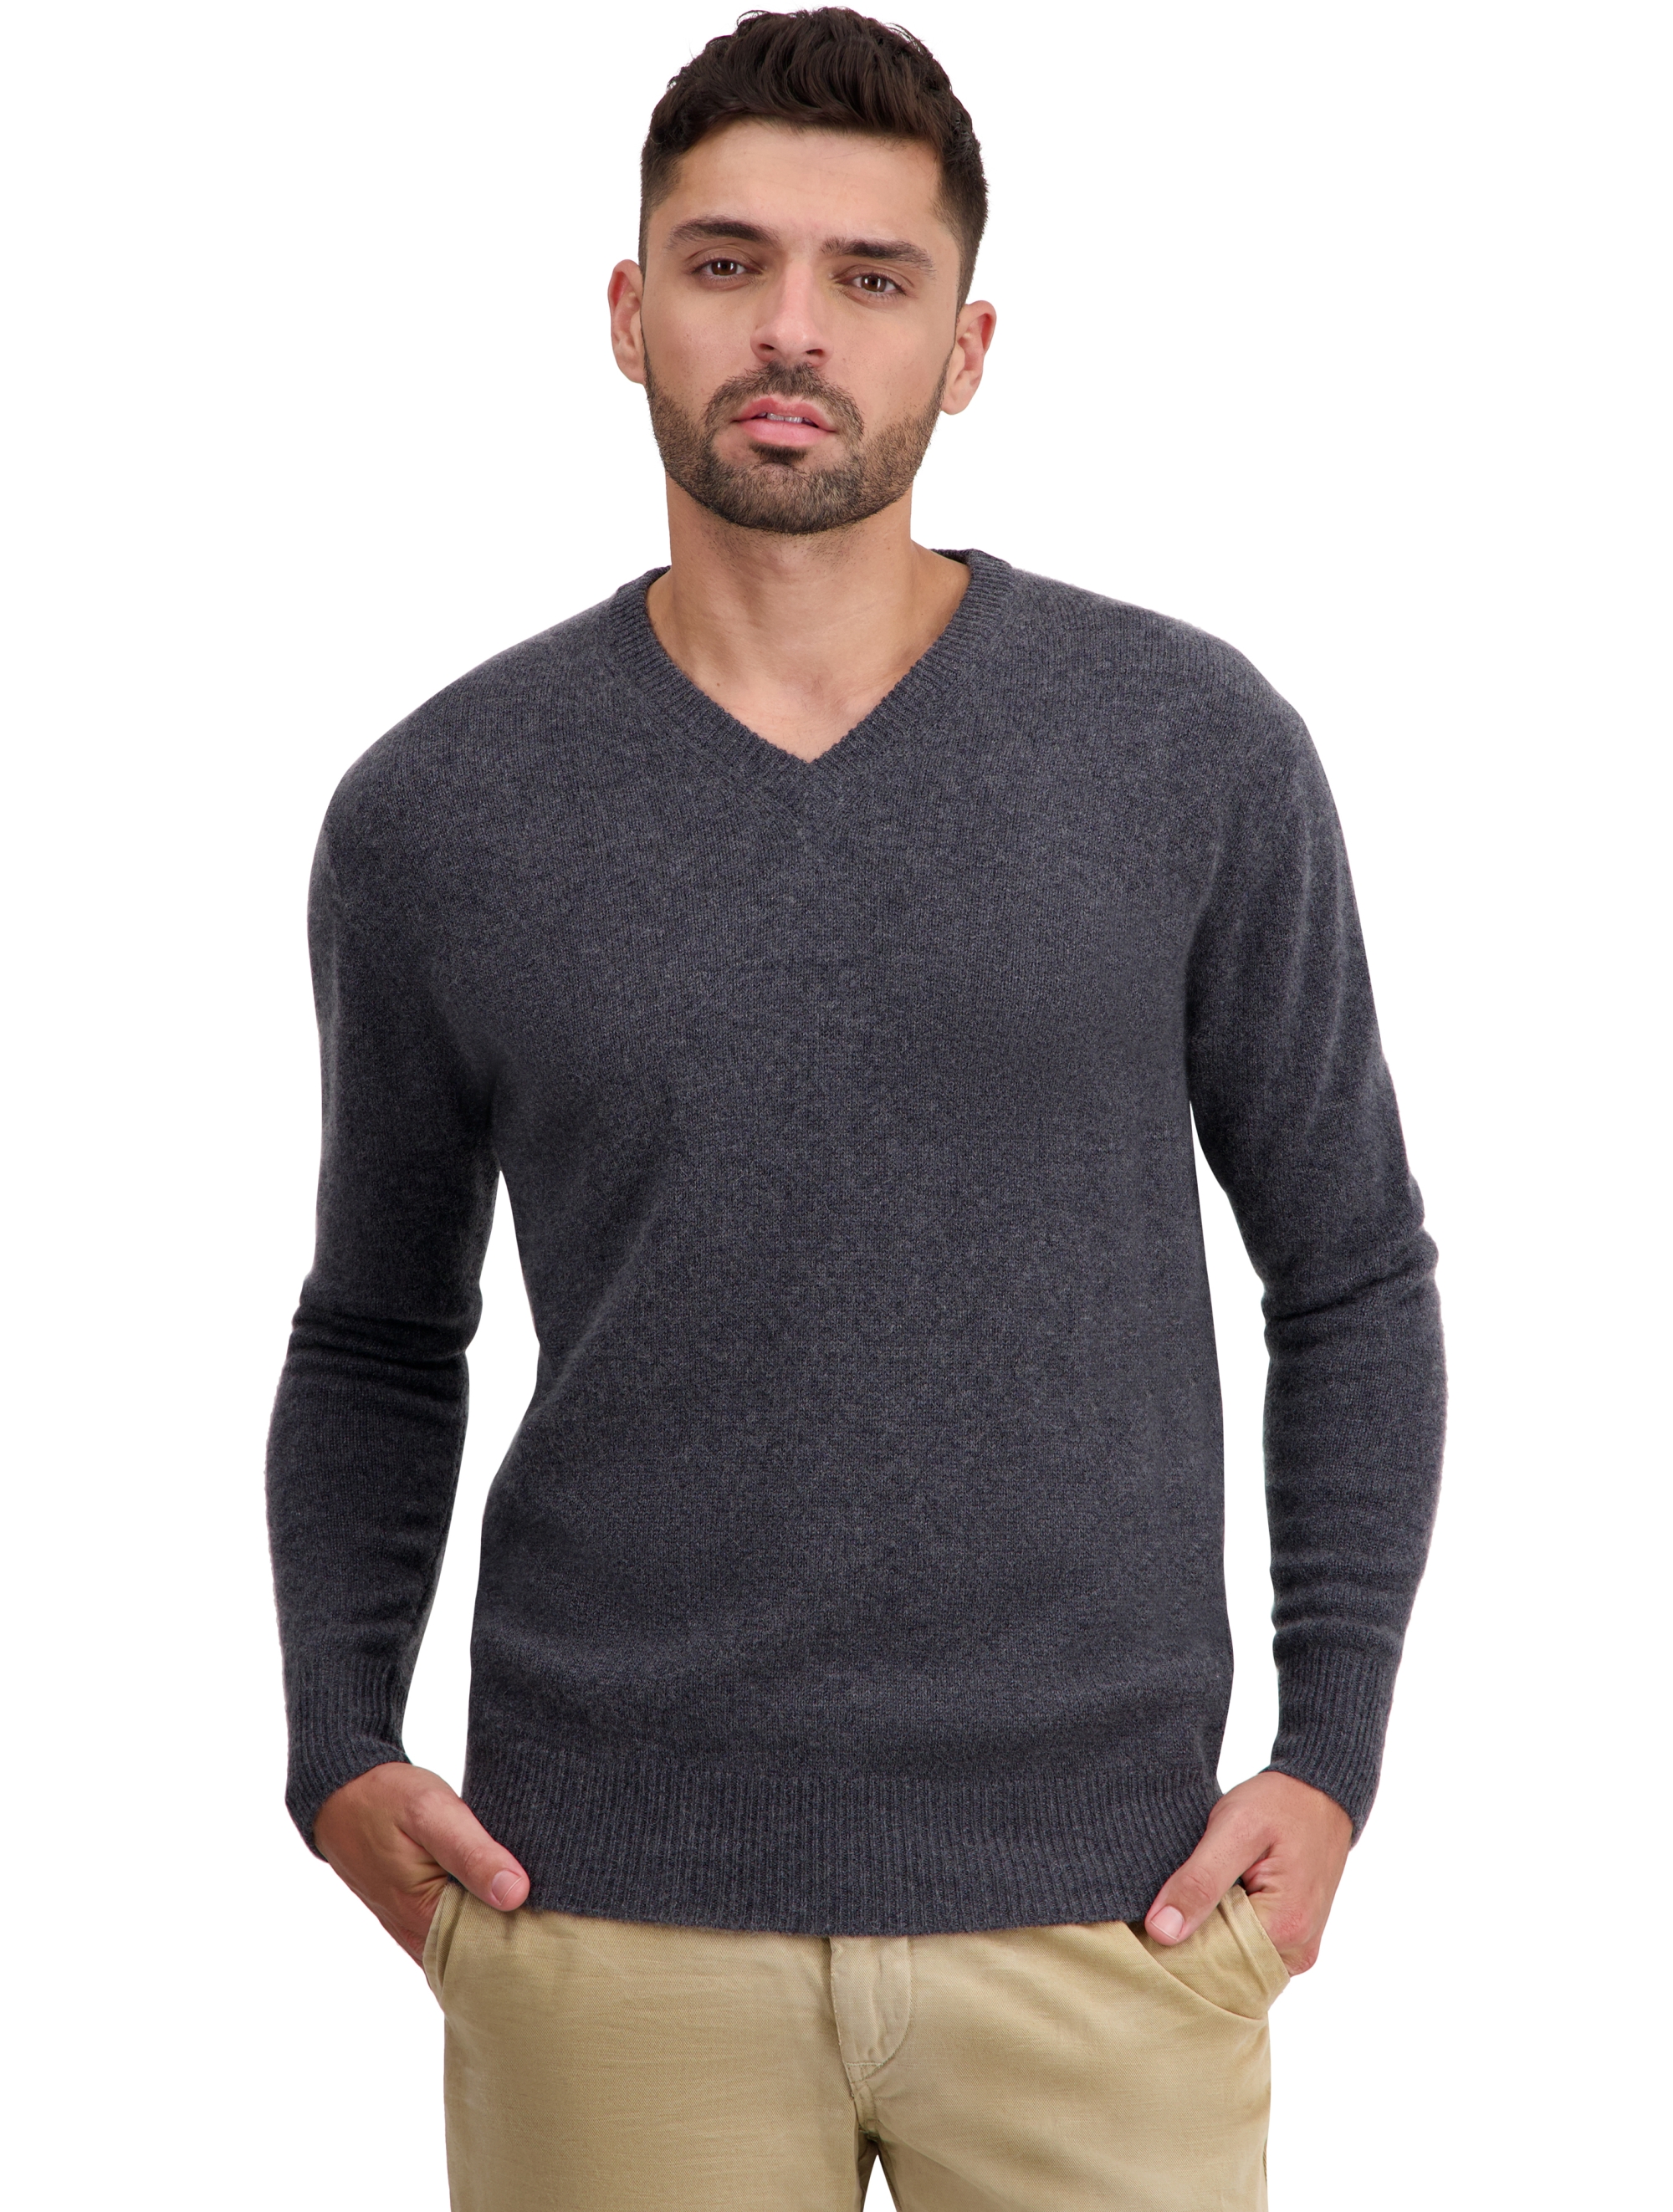 Cachemire pull homme epais tour first anthracite chine l